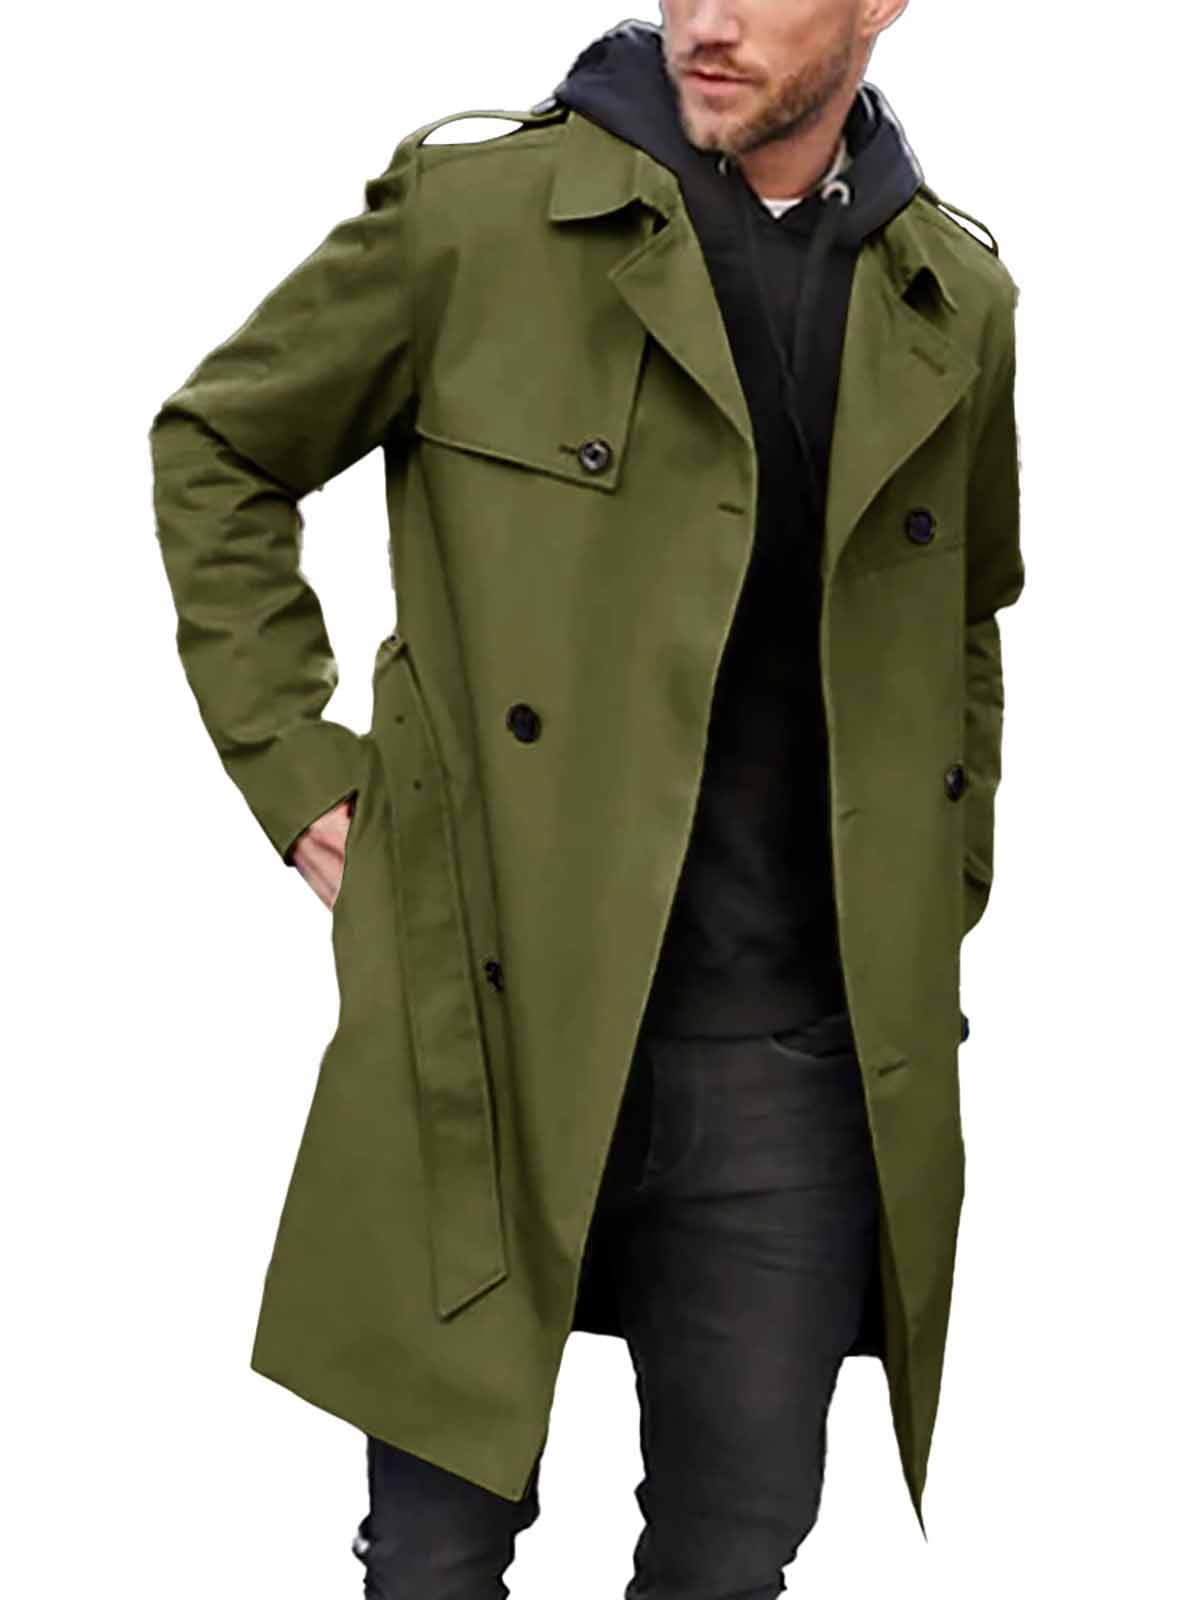 Ybenlow Men's Business and Leisure Double Breasted Trench Coat with ...